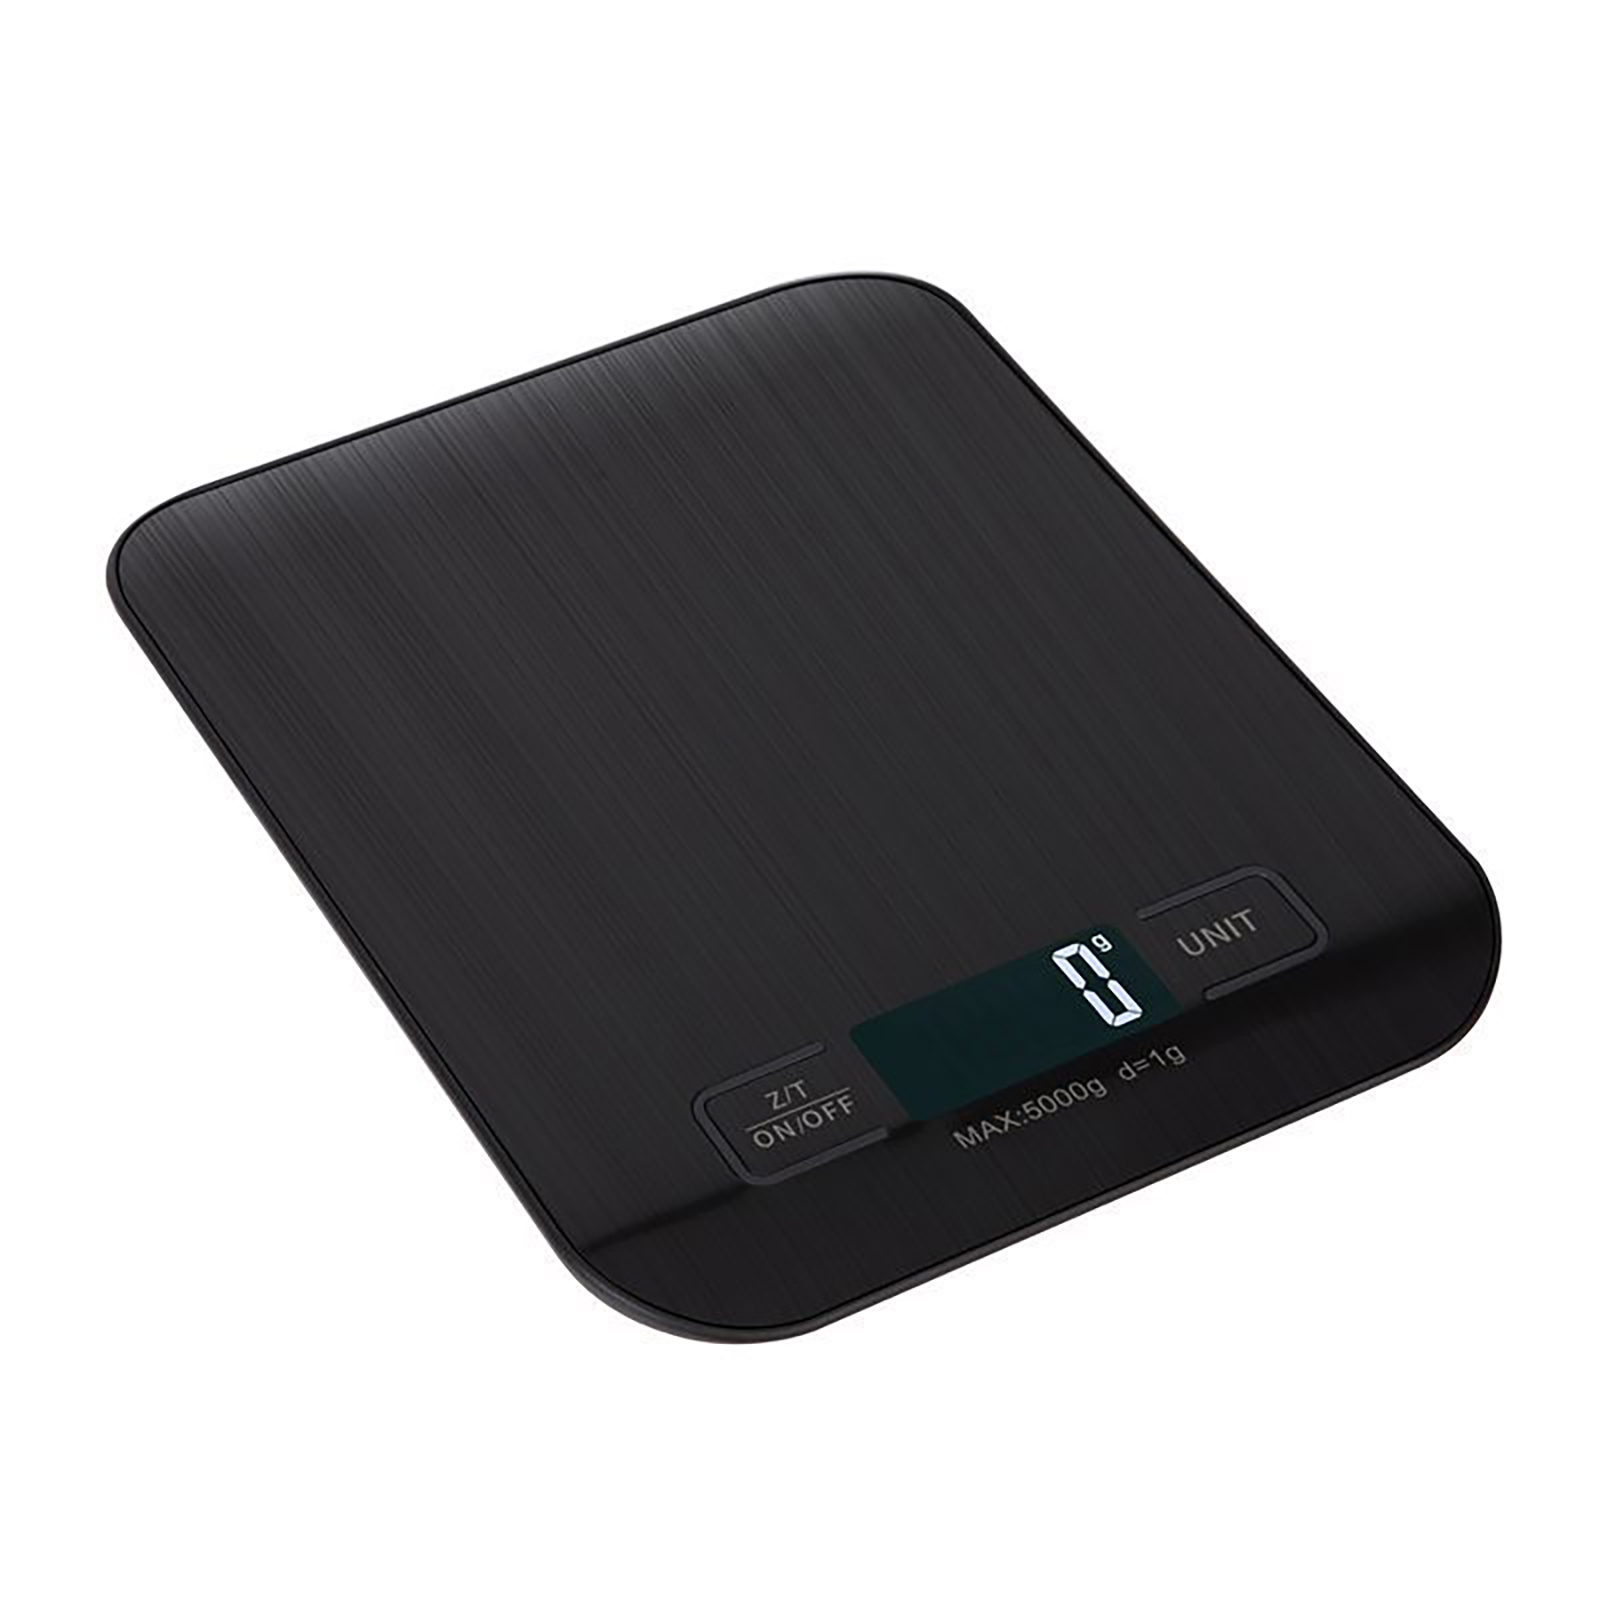 Kitchen Scale With High-precision Sensors Back-Lit LCD Display 6 Weight Units G/kg/oz/lb/mill Ml/ml Digital Electronic Scales For Baking Cooking 5kg/1g